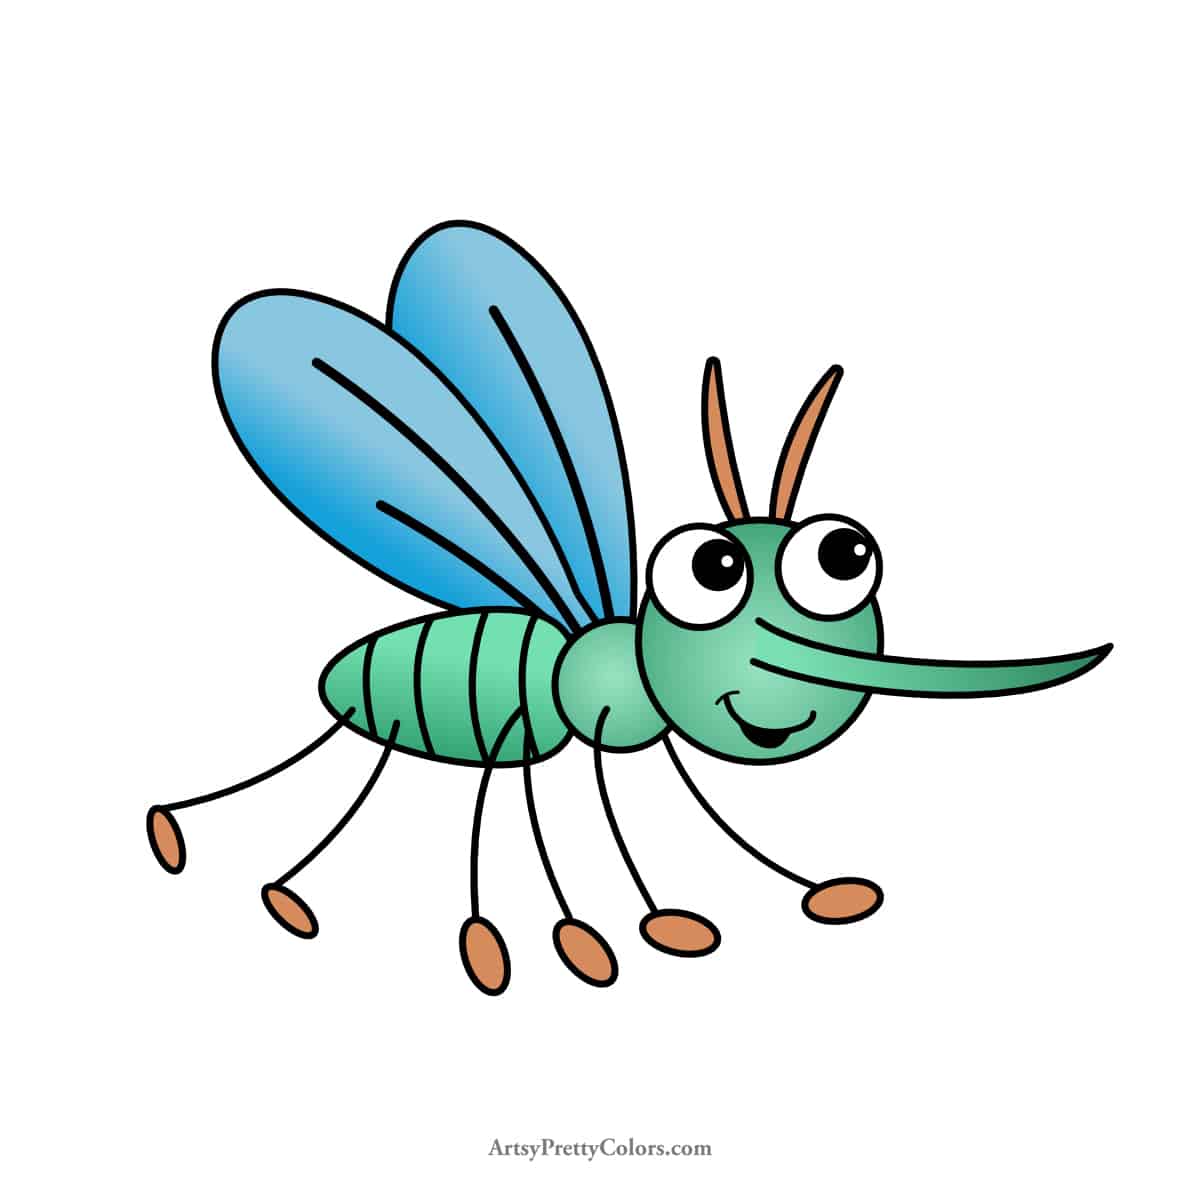 picture of a line drawing of a mosquito that is finished from a tutorial for how to draw one. Mosquito is colored in.